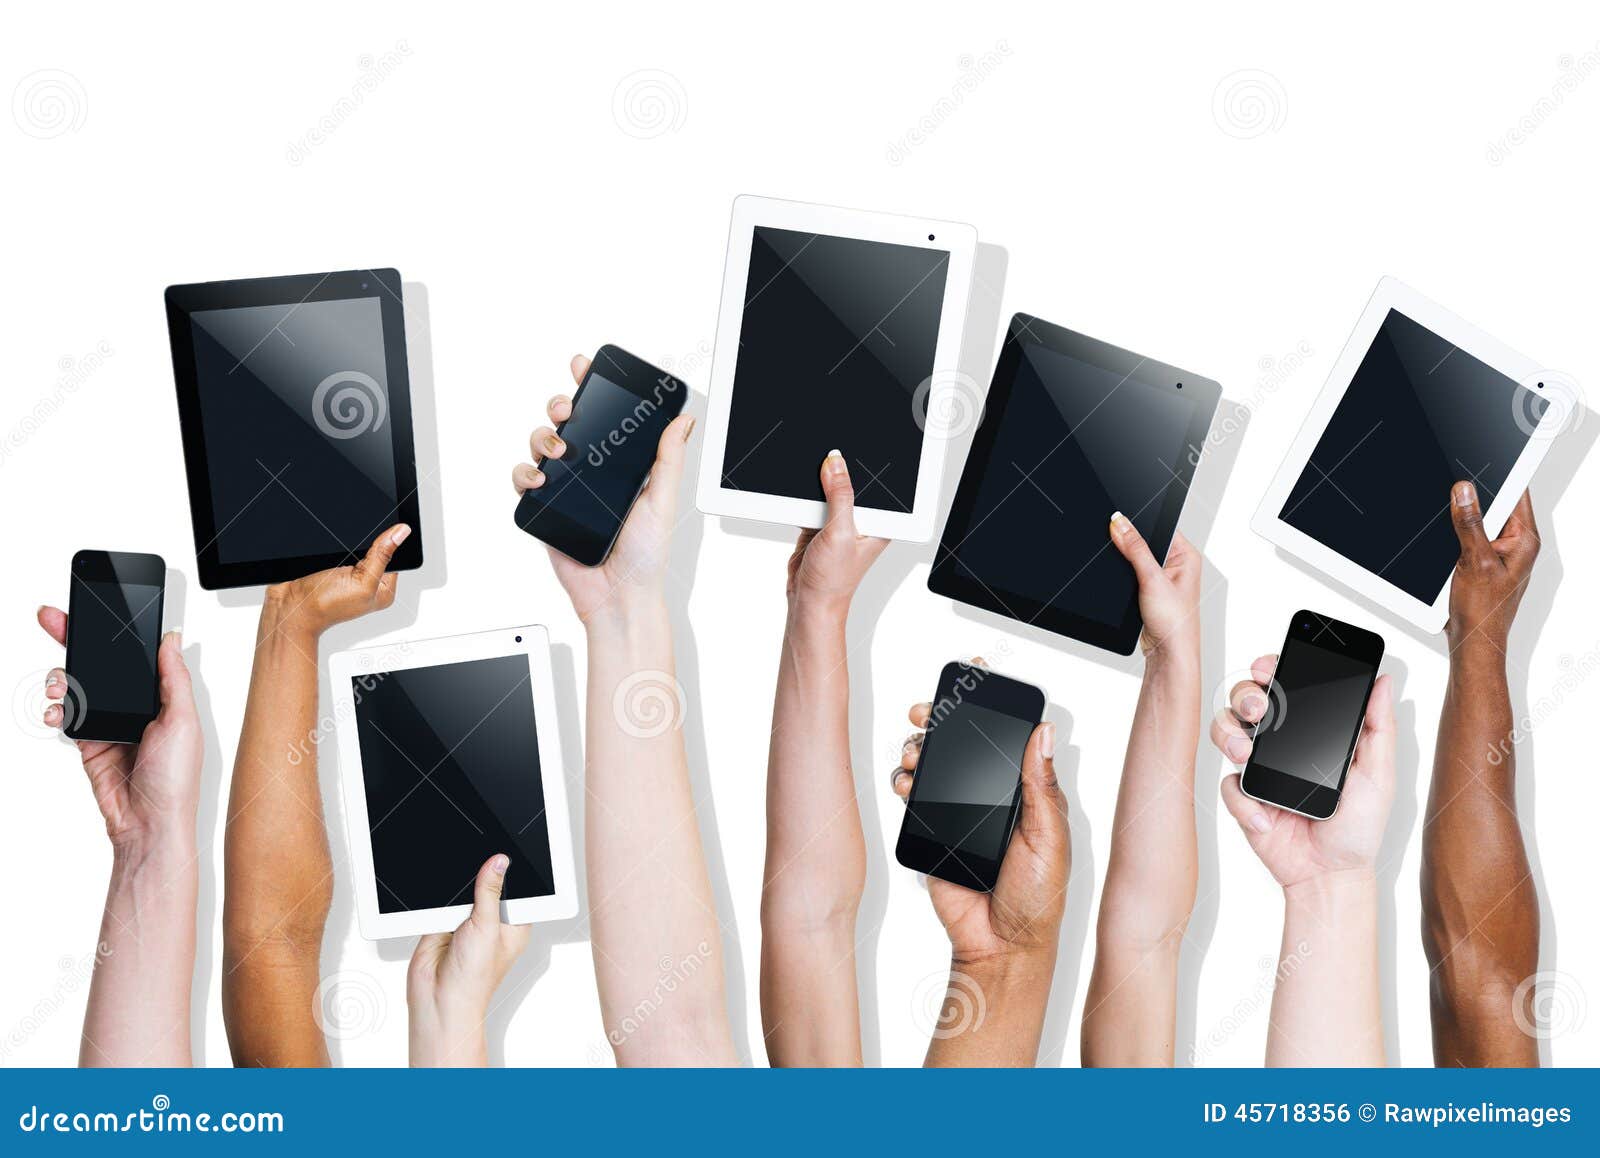 group of hands holding digital devices